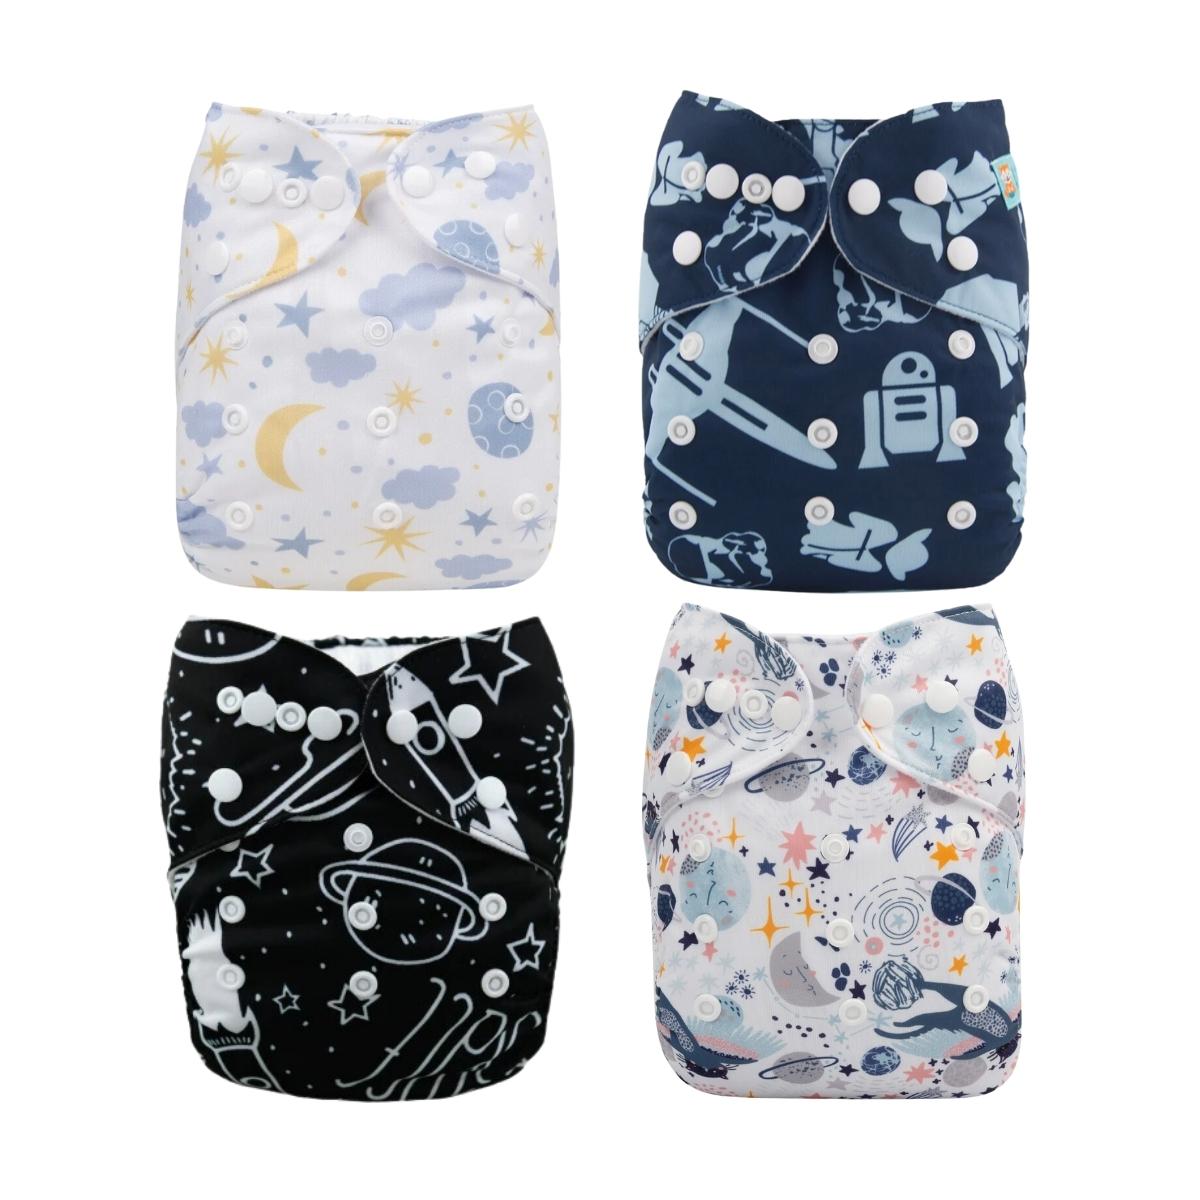 Alva Baby Space Modern Cloth Nappy 4 Pack Trial Bundle